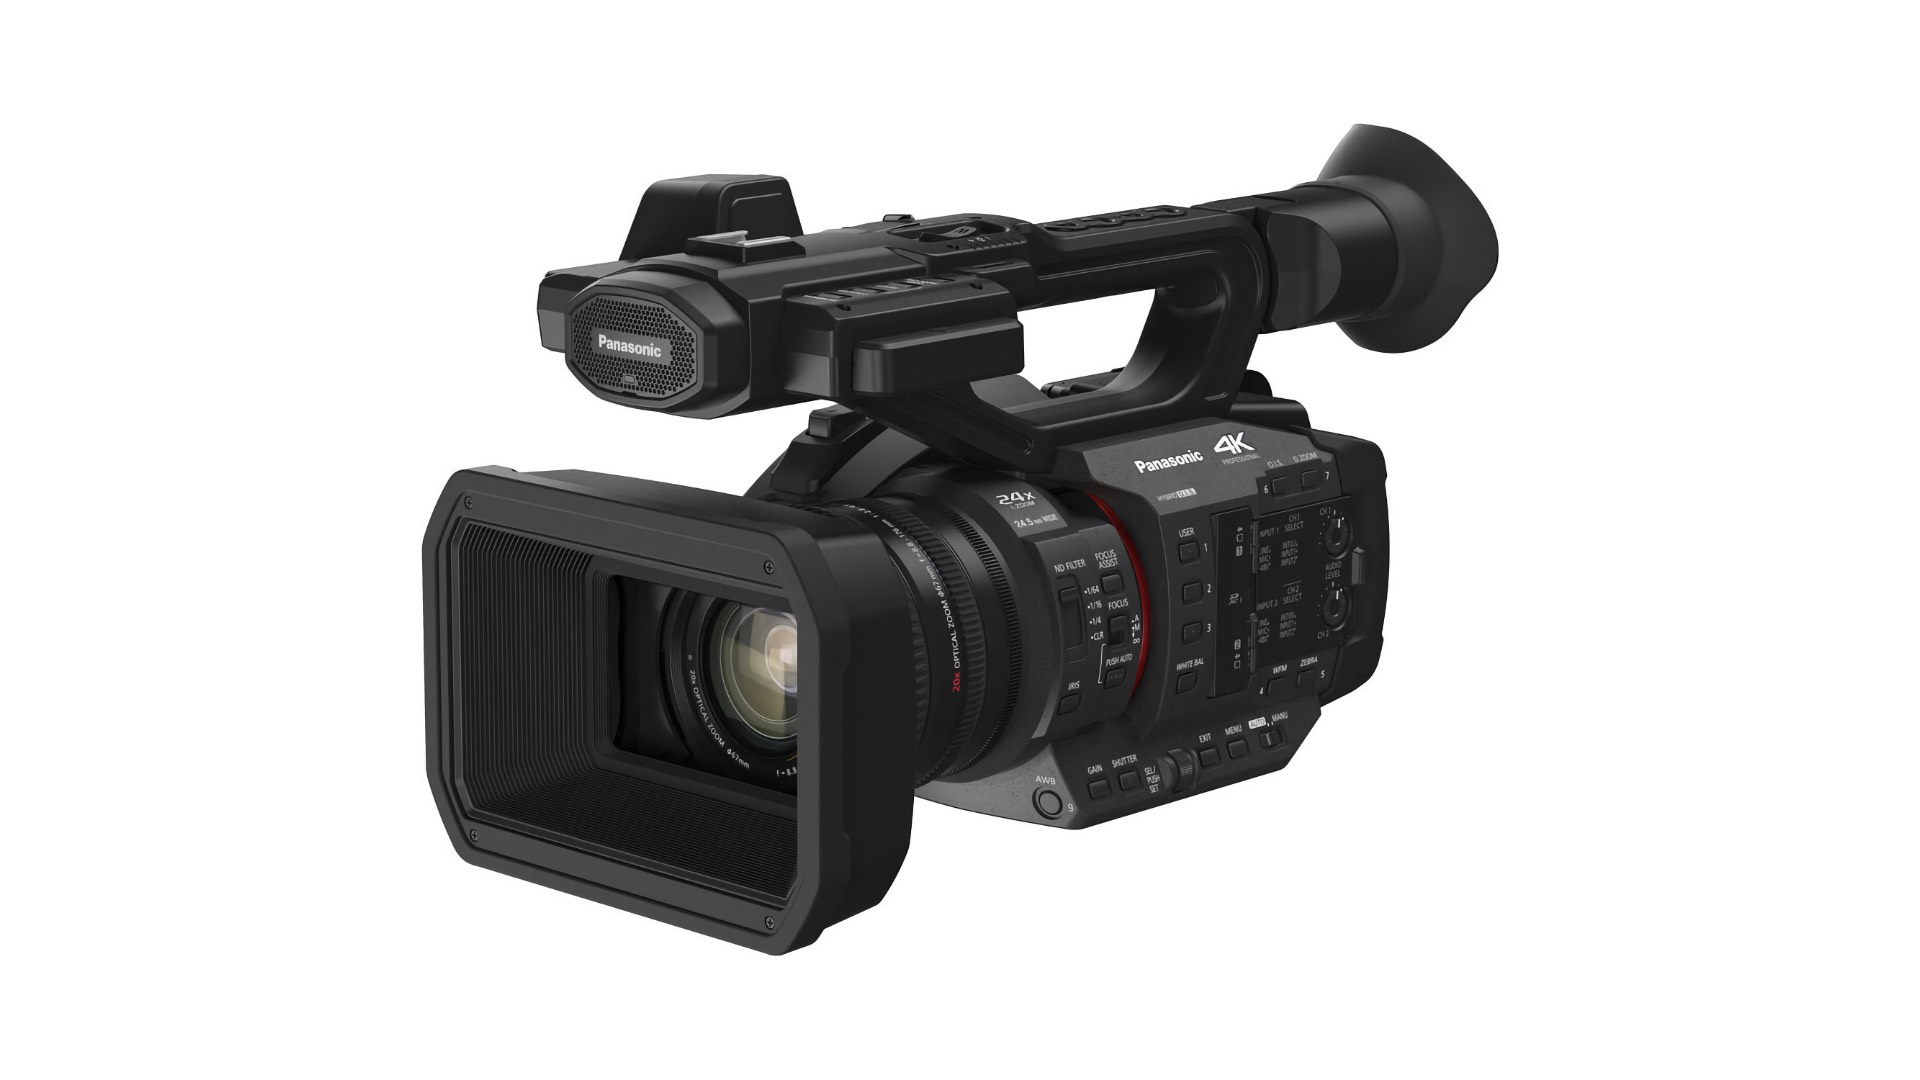 The new Panasonic HC-X2 will sell for around the £2900 mark